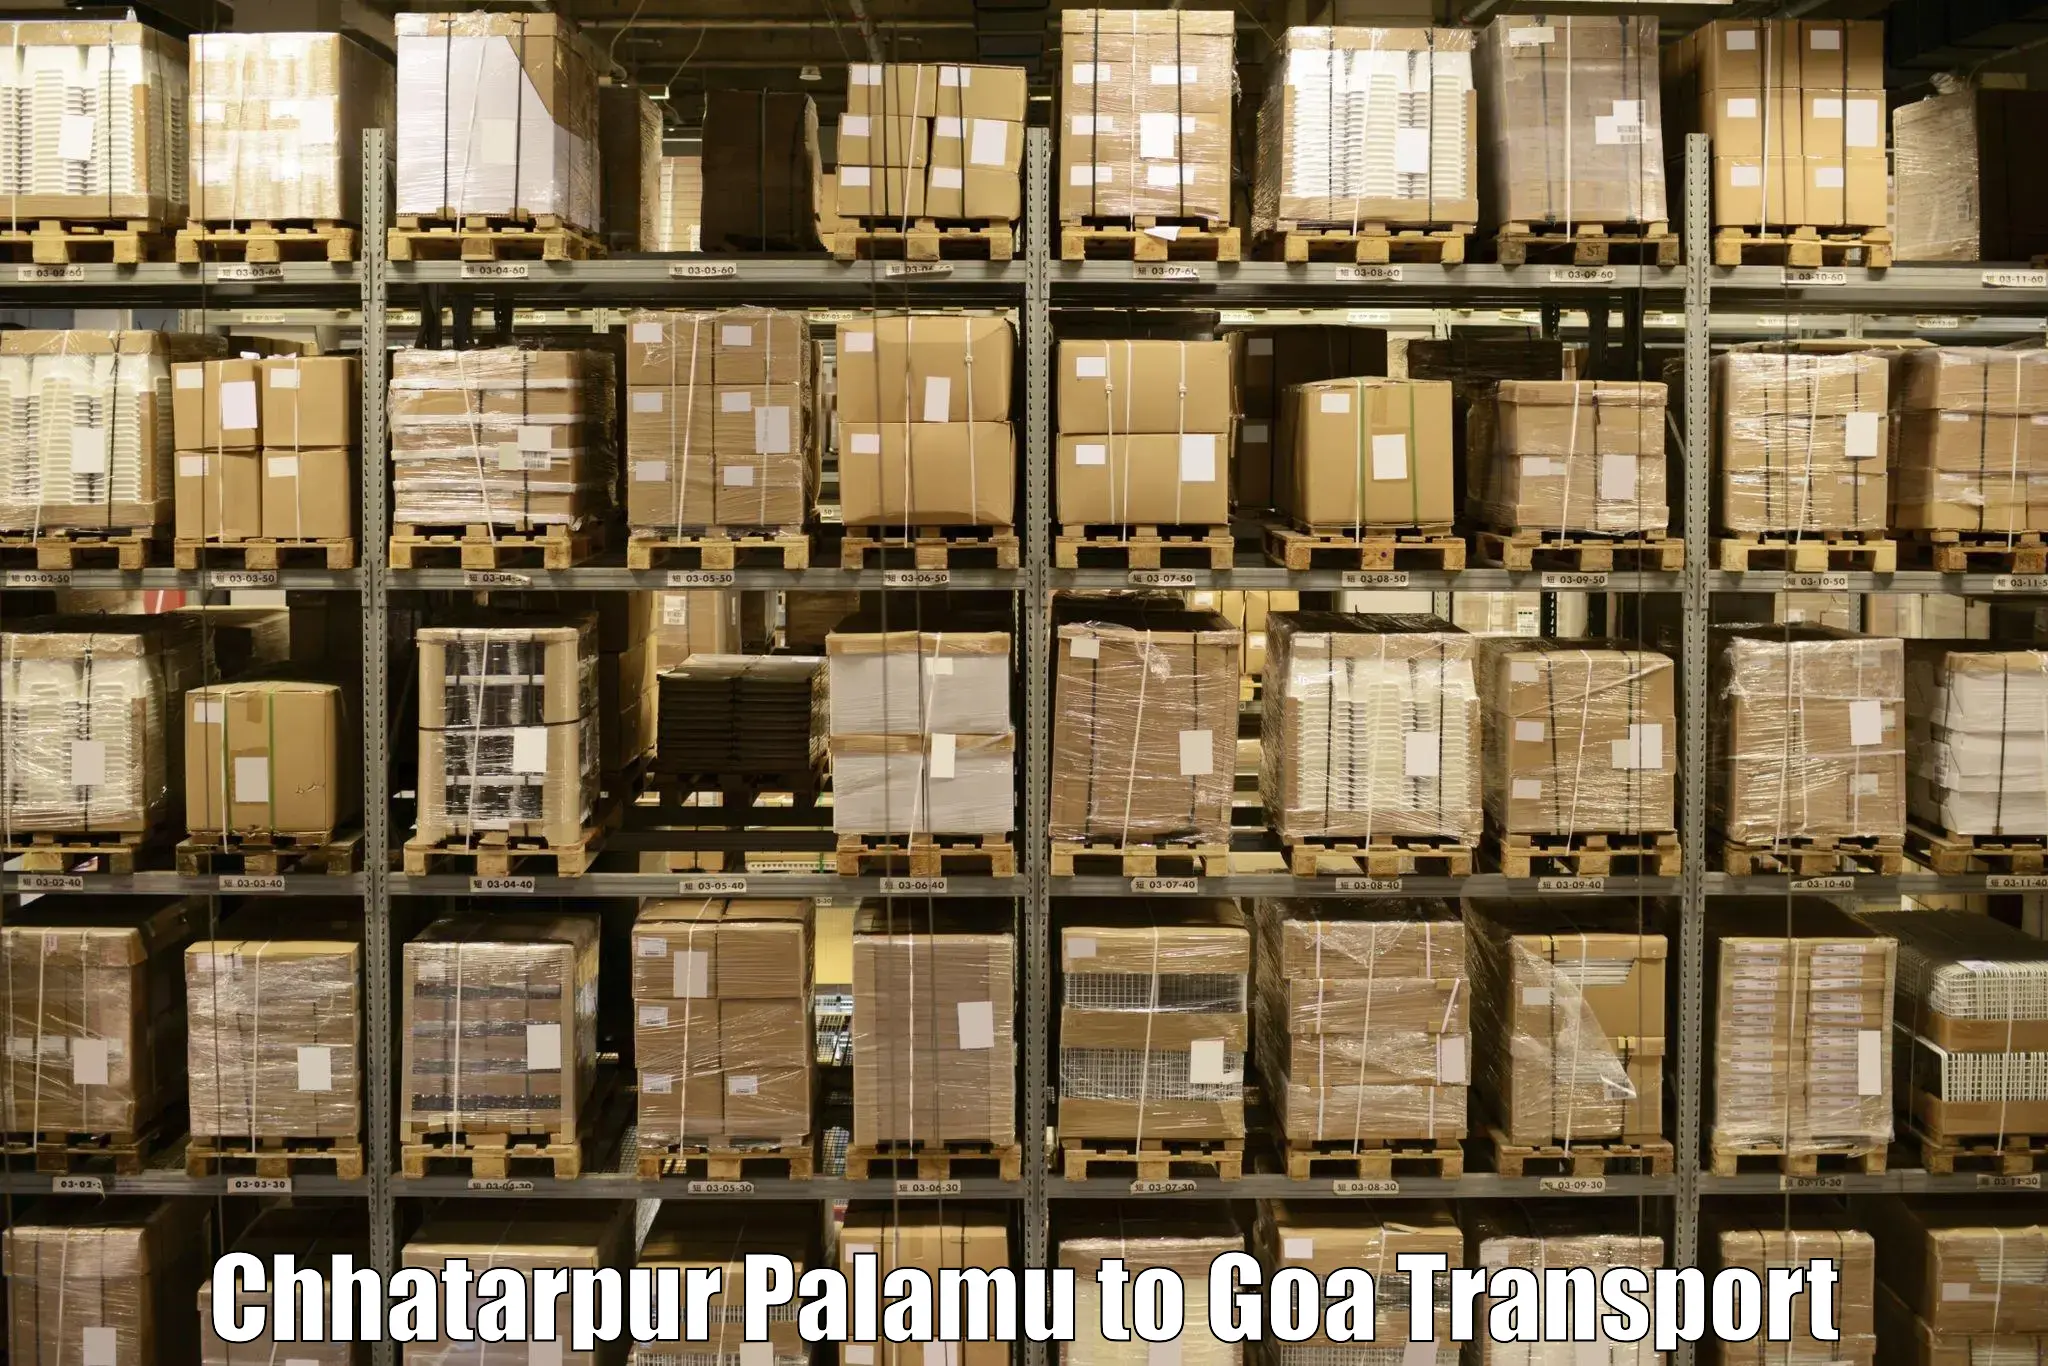 Road transport services in Chhatarpur Palamu to Margao